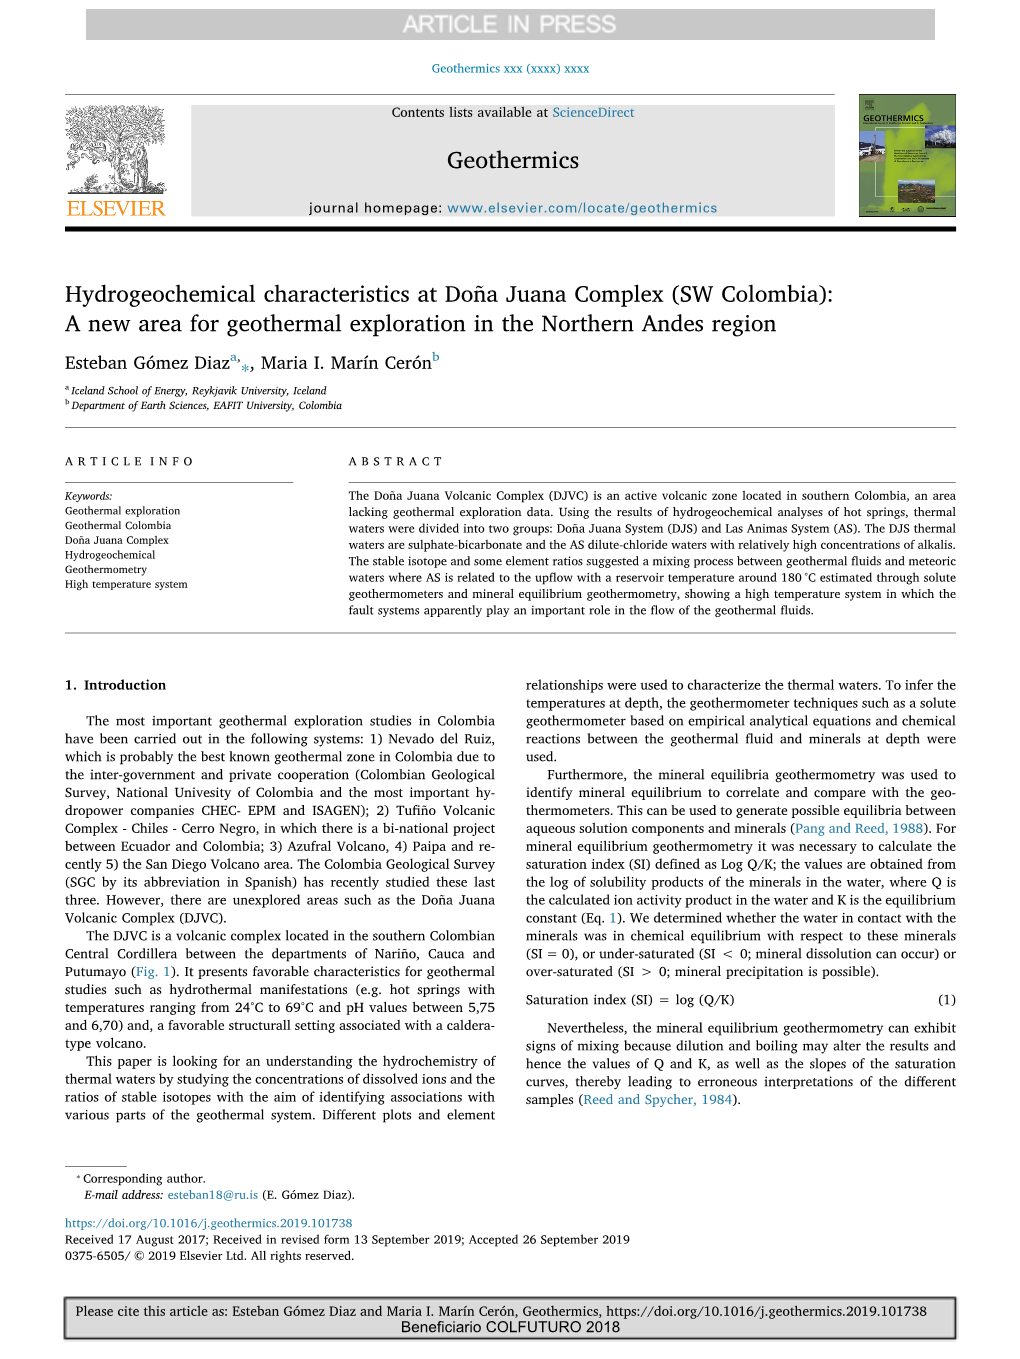 Hydrogeochemical Characteristics at Doña Juana Complex (SW Colombia): a New Area for Geothermal Exploration in the Northern Andes Region